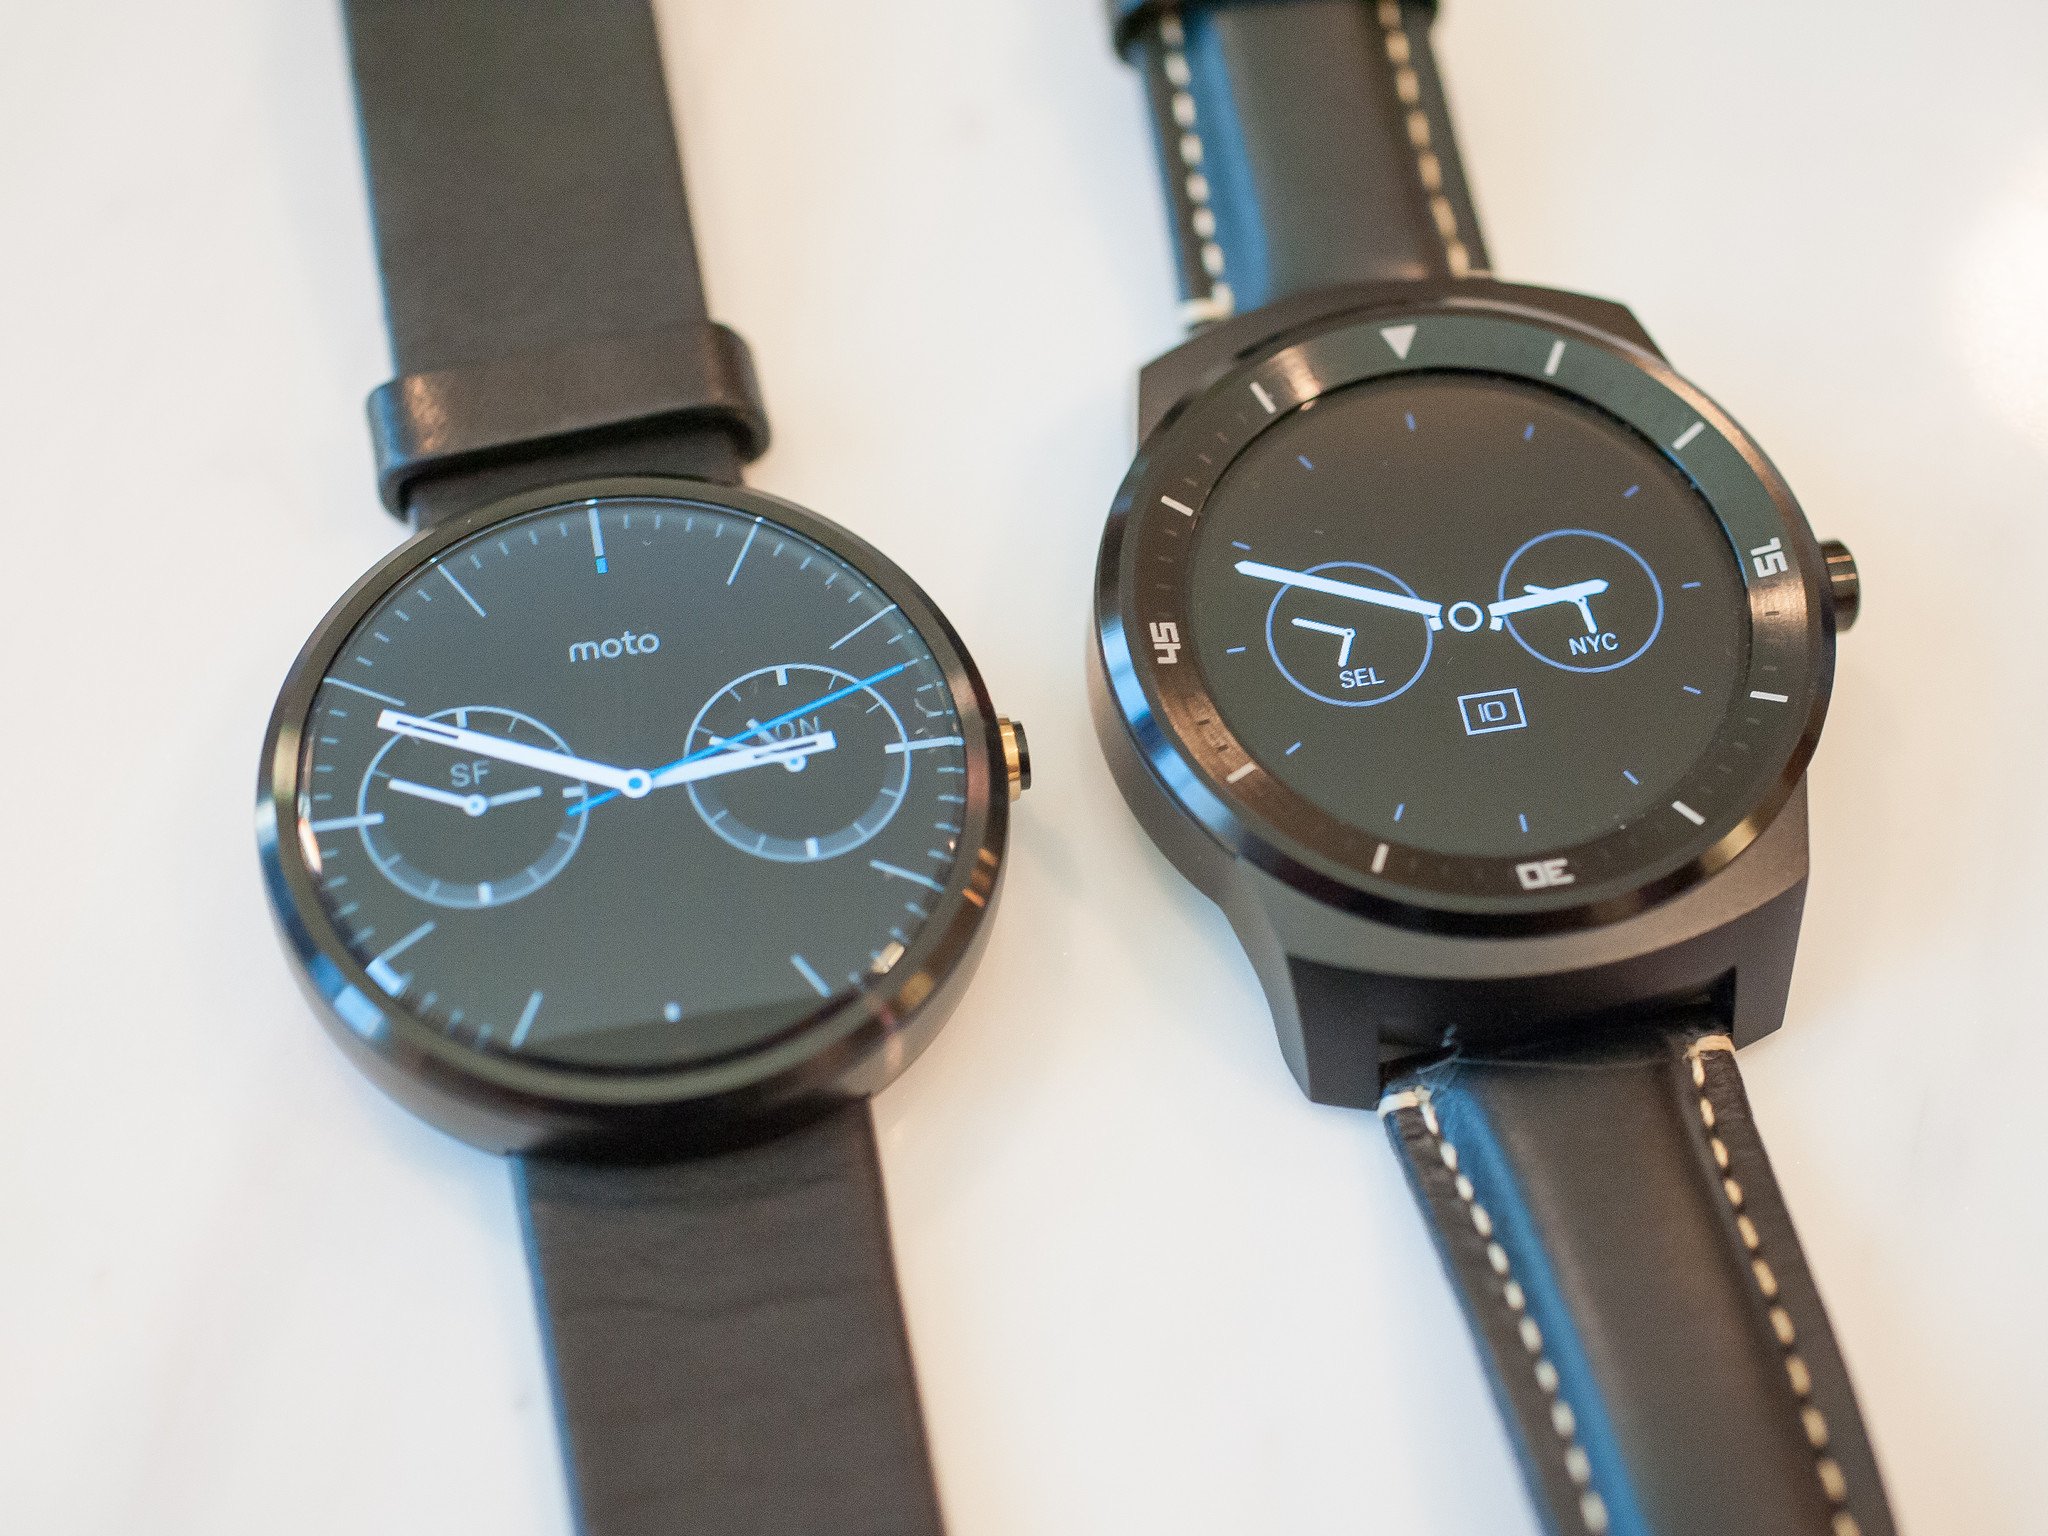 Moto 360 and LG G Watch R